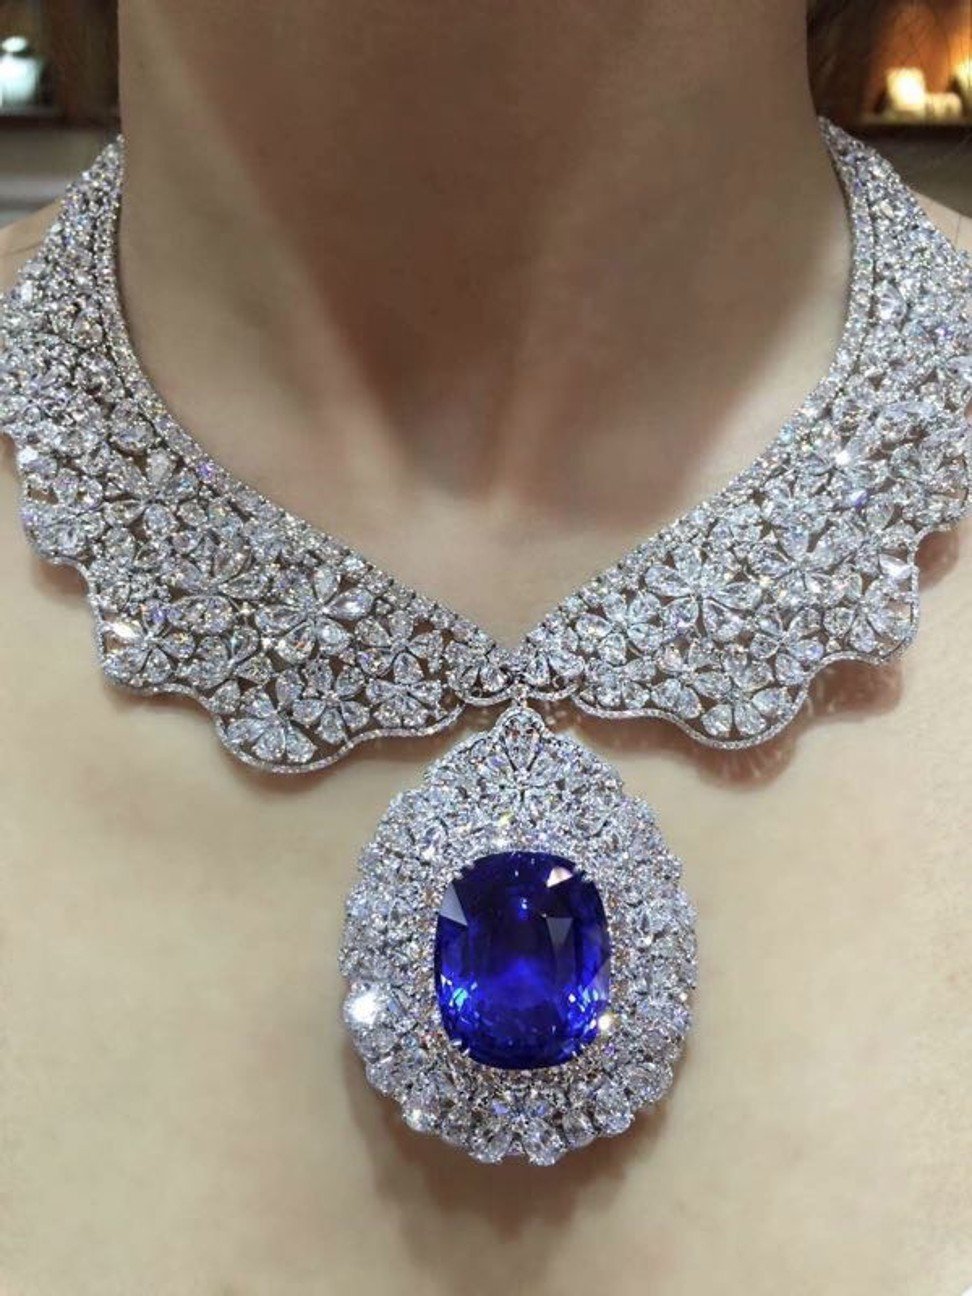 Jadmily Jewelry Corporation’s sapphire necklace, valued at HK$60 million (US$7.6 million).